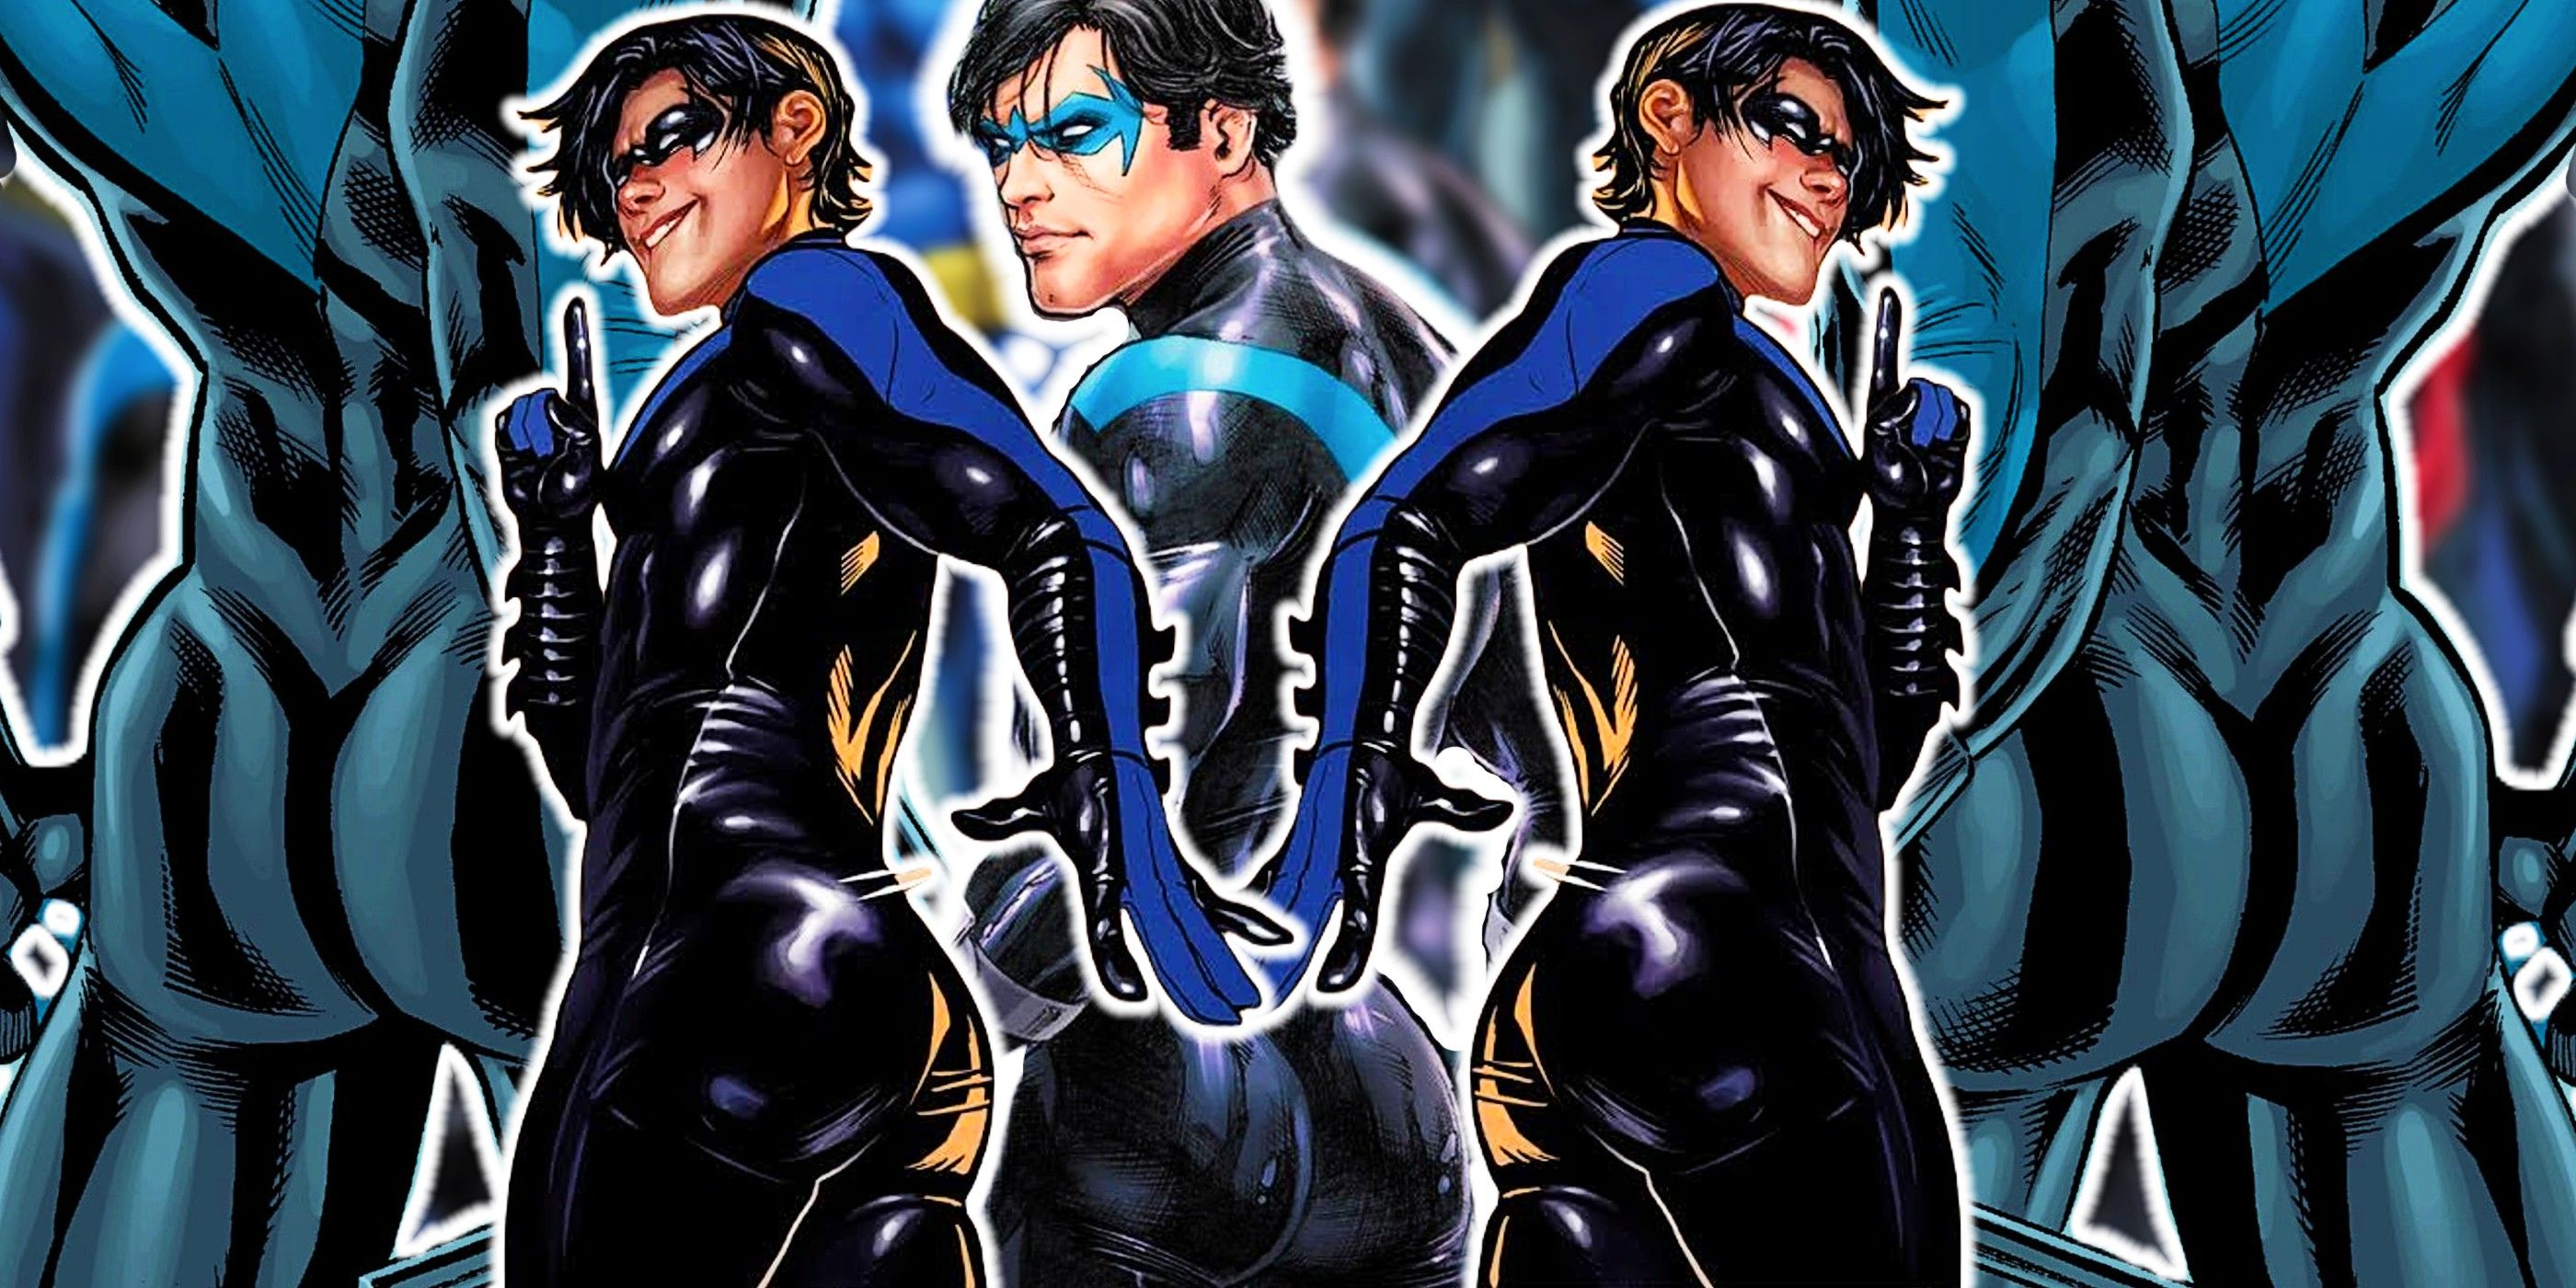 Nightwings Butt Takes Center Stage In Dcs Superhero Day Celebration